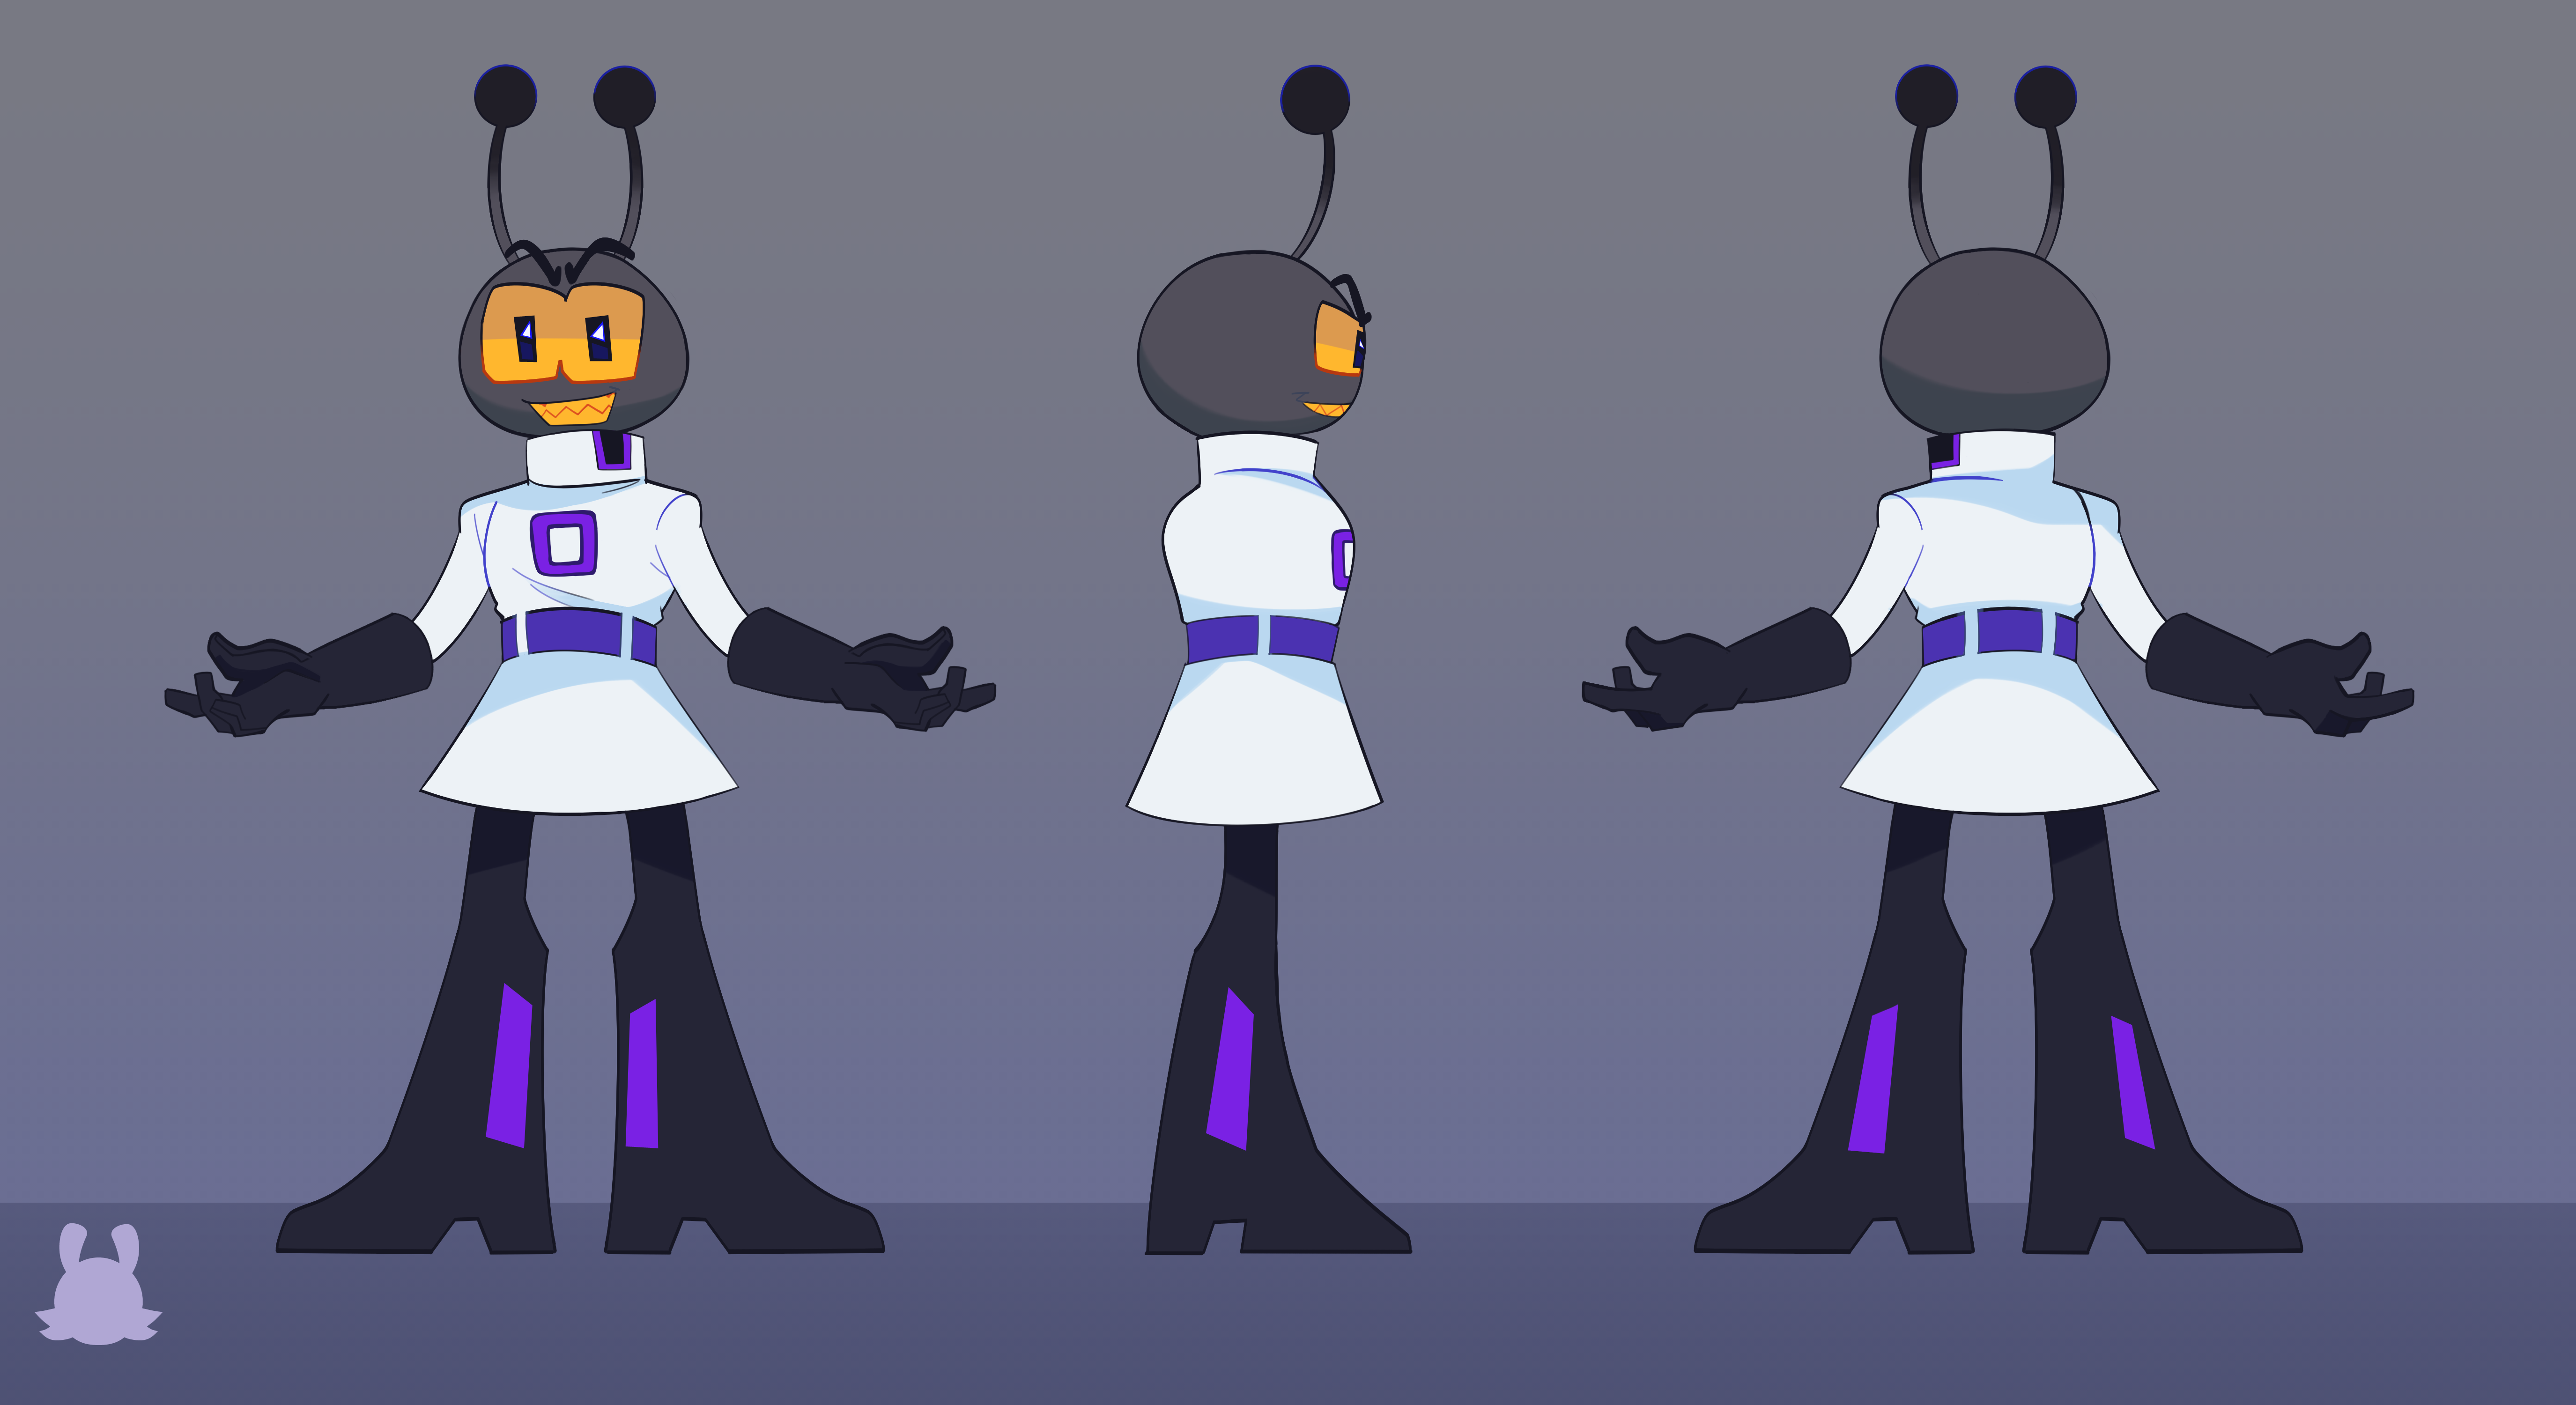 Reference Sheet of My OC Ordio. He is a purple greyish alien with darker tips at the top of his antennae. He wears a white suit with a giant purple O in the middle with black boots as well as a puple belt around his waist.